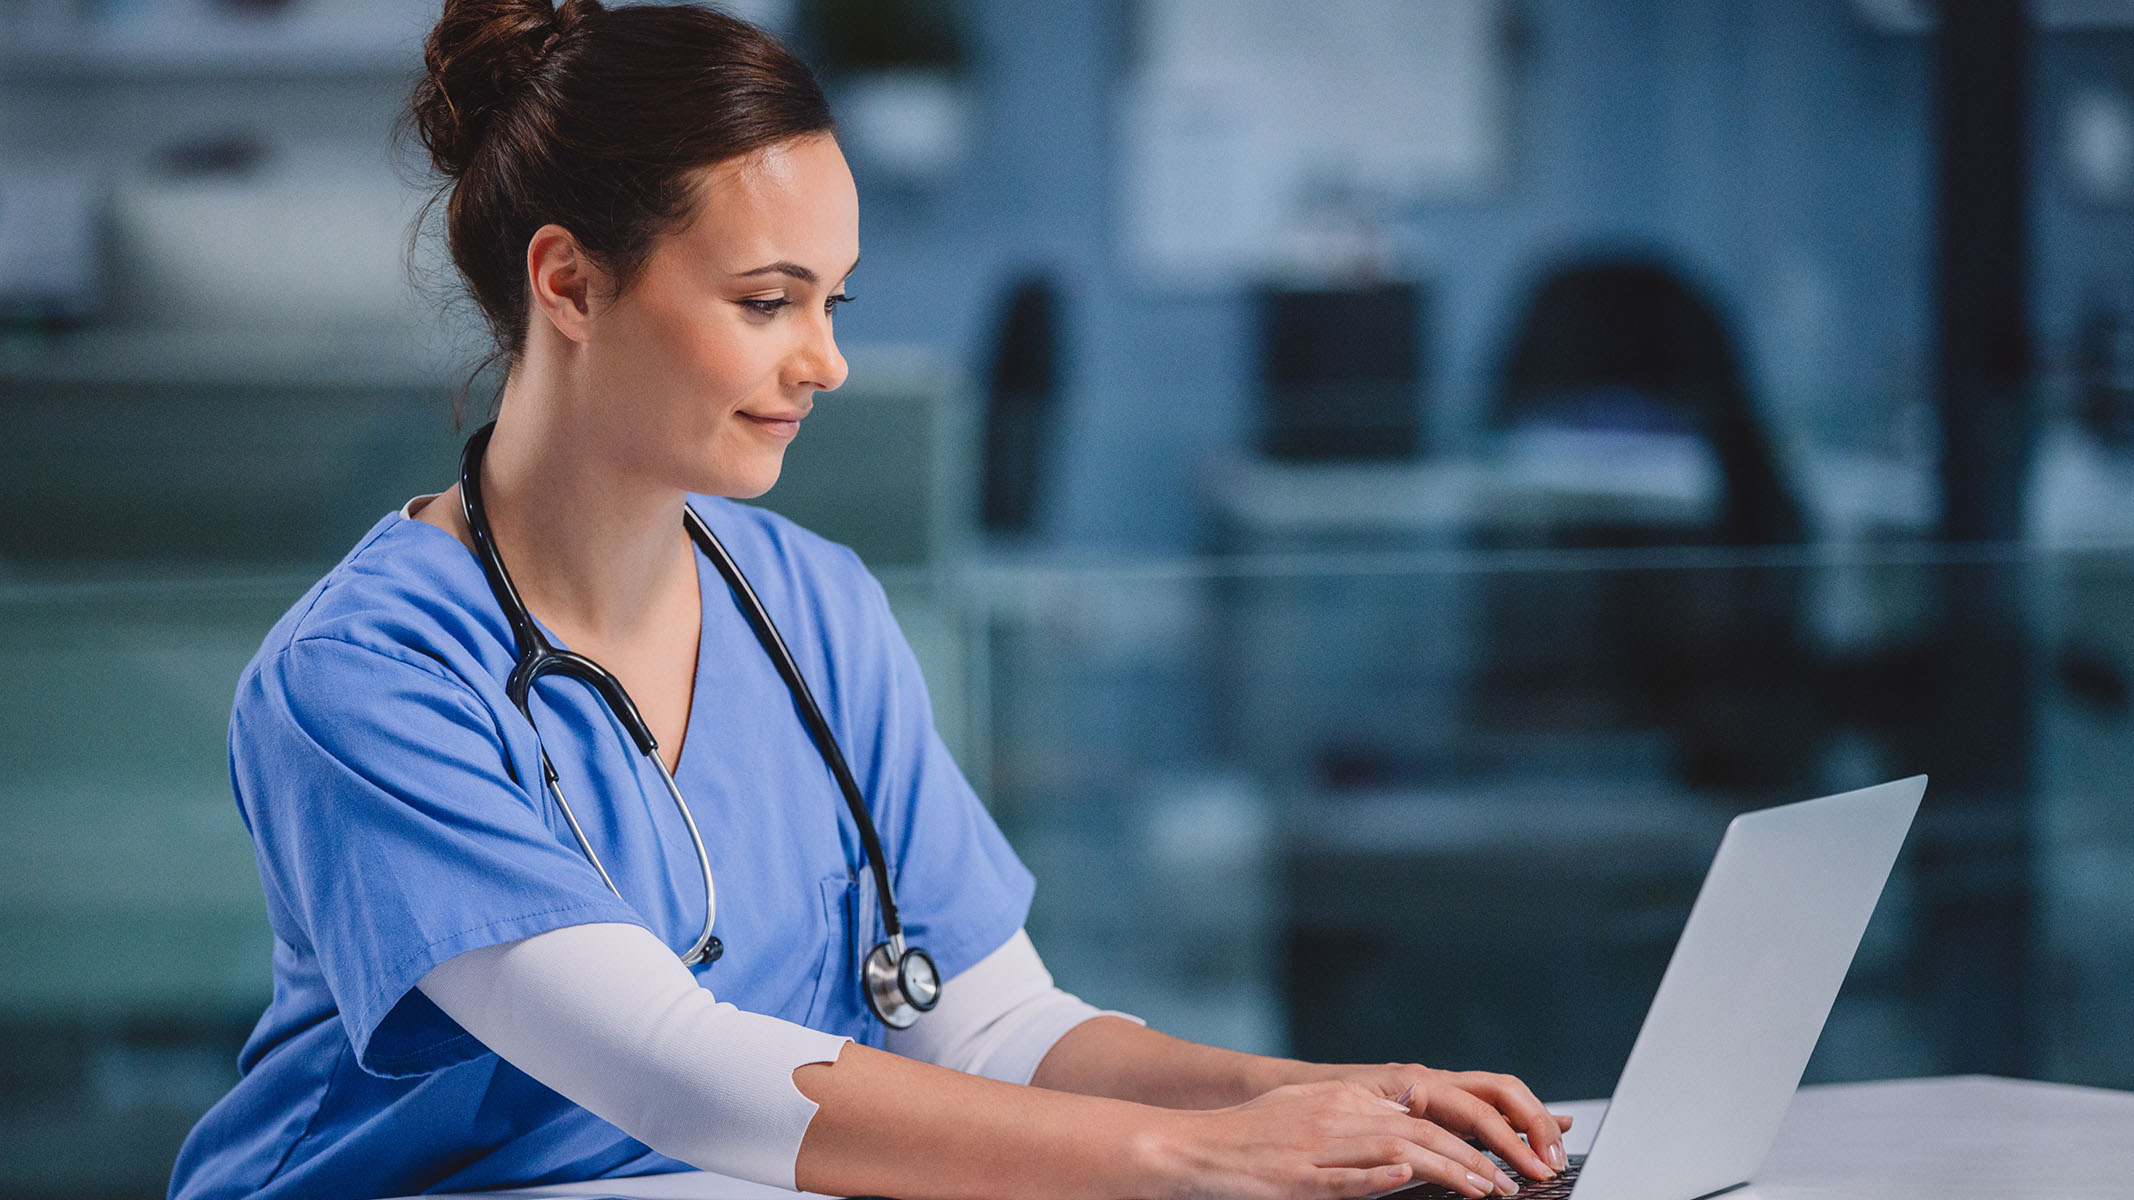 Healthcare professional using a laptop.